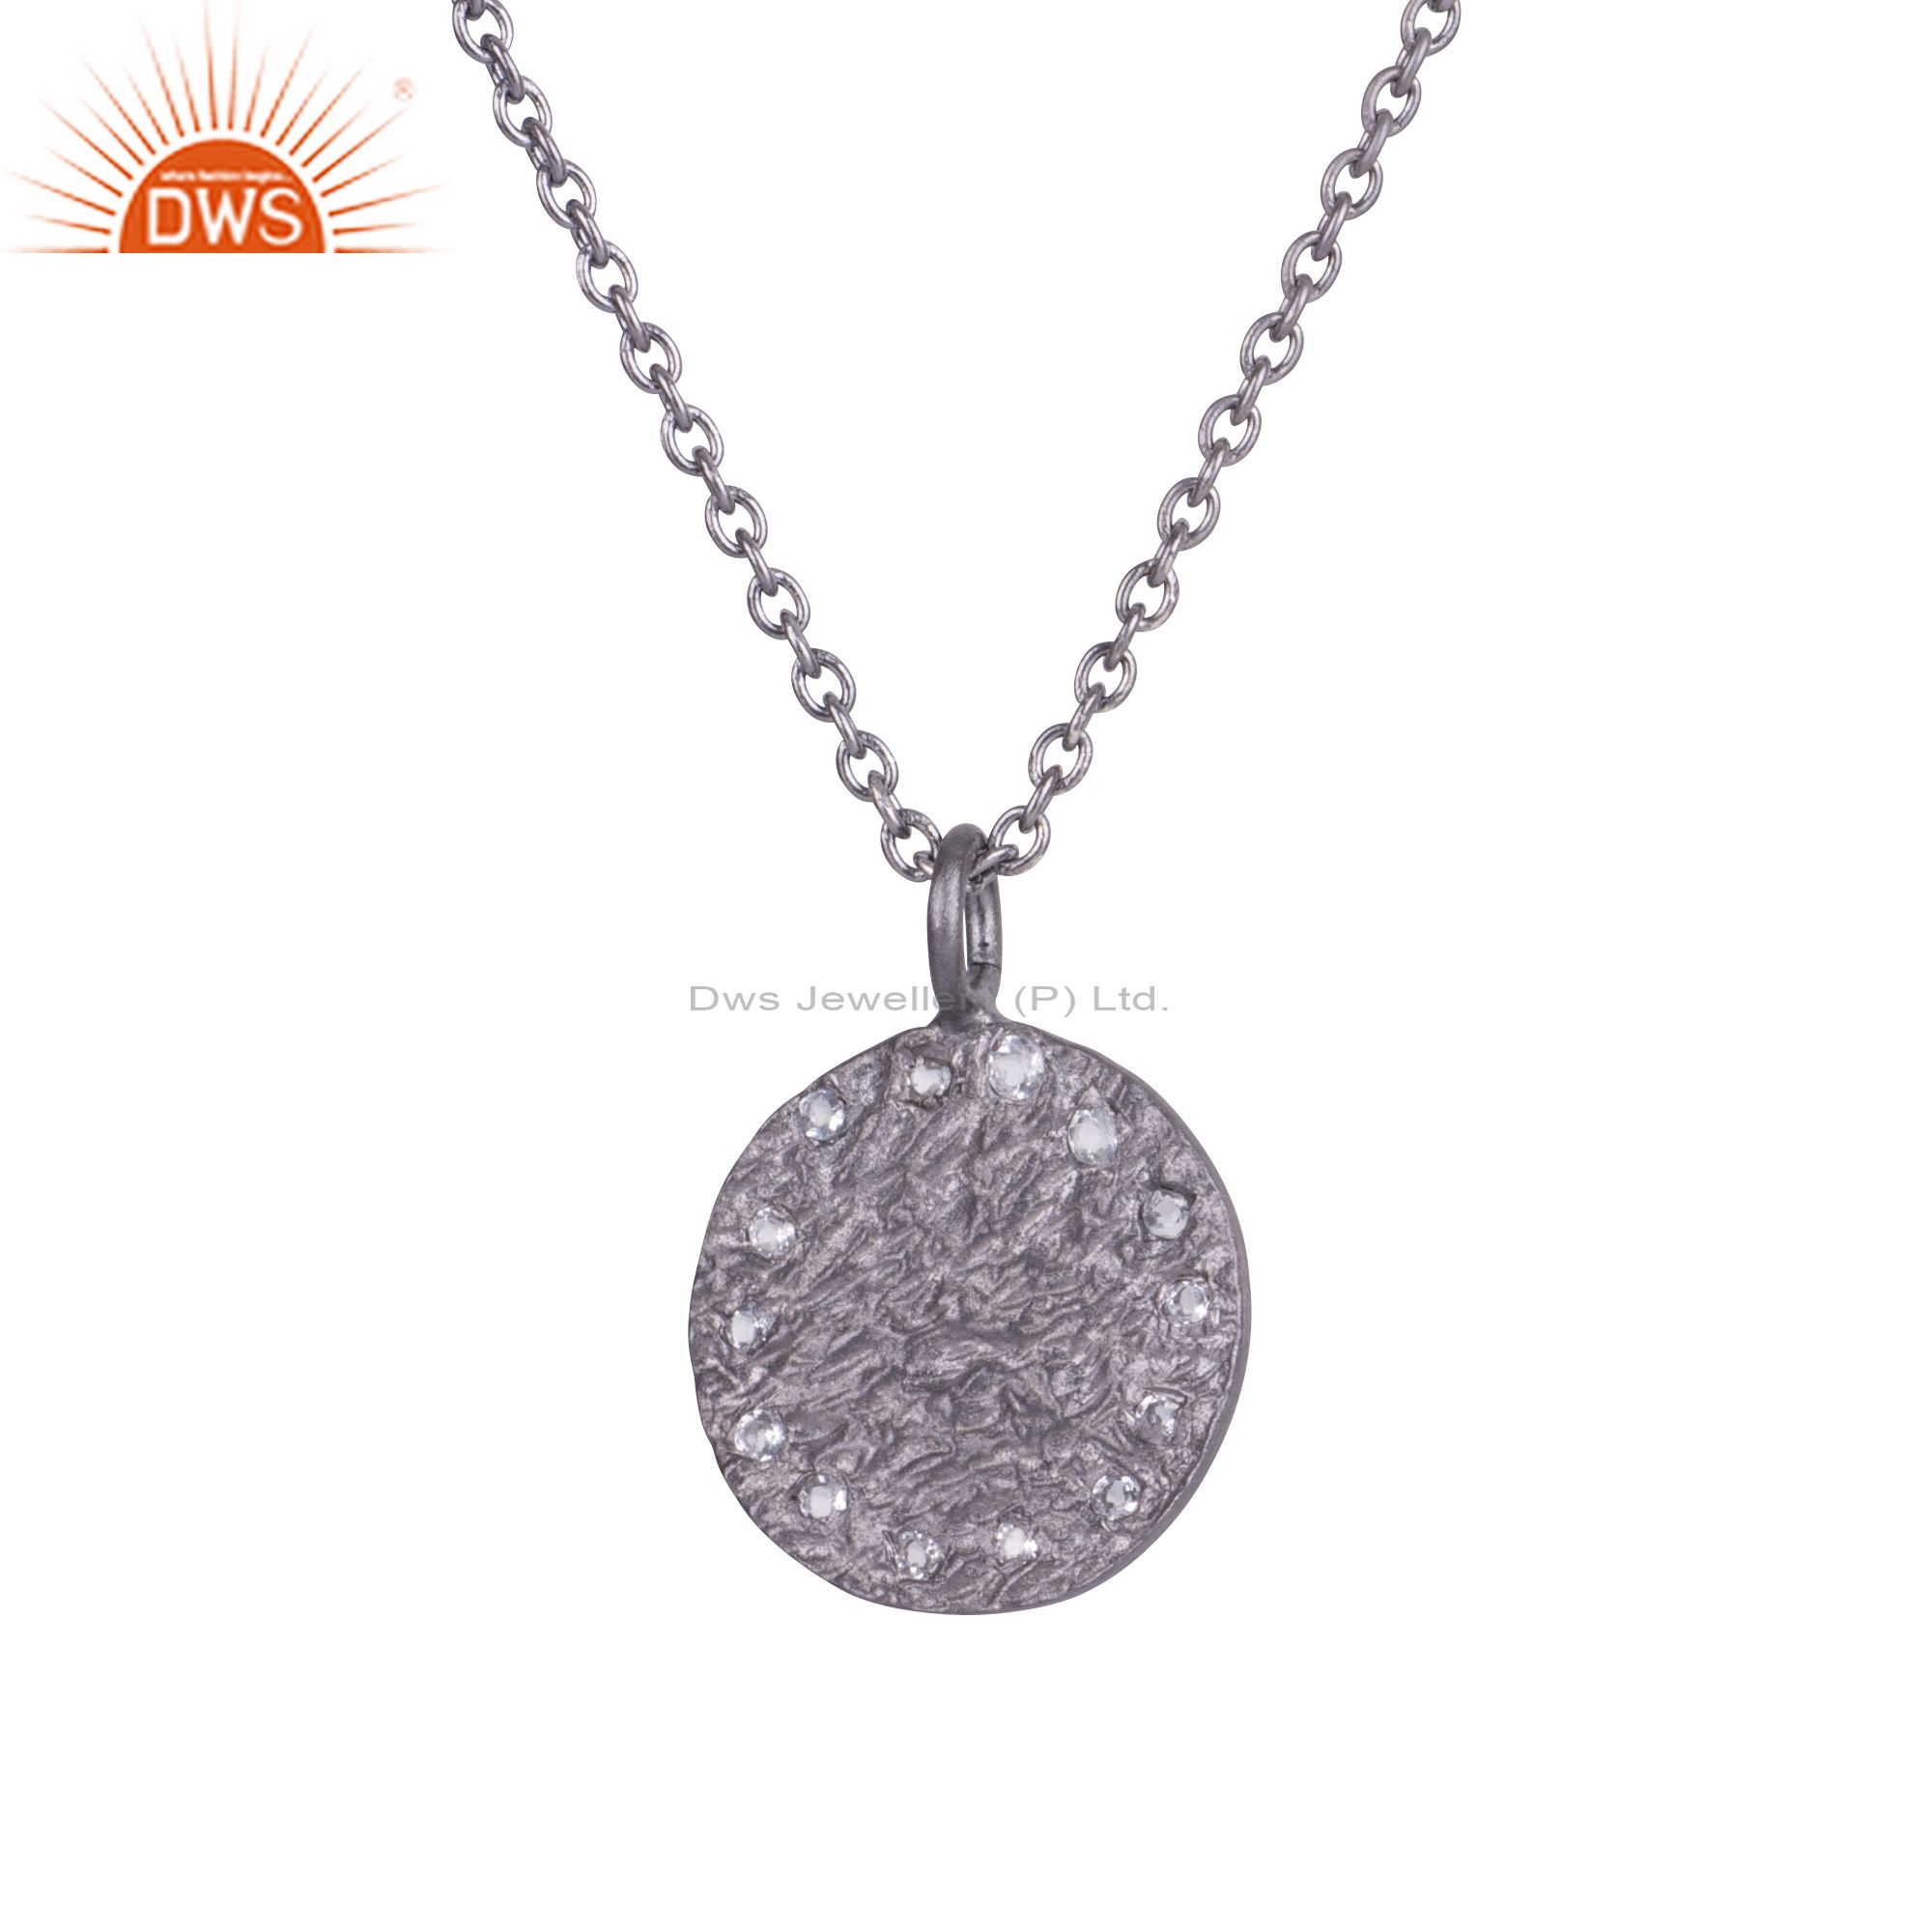 White topaz sterling silver oxidized hammered disc pendant with chain necklace